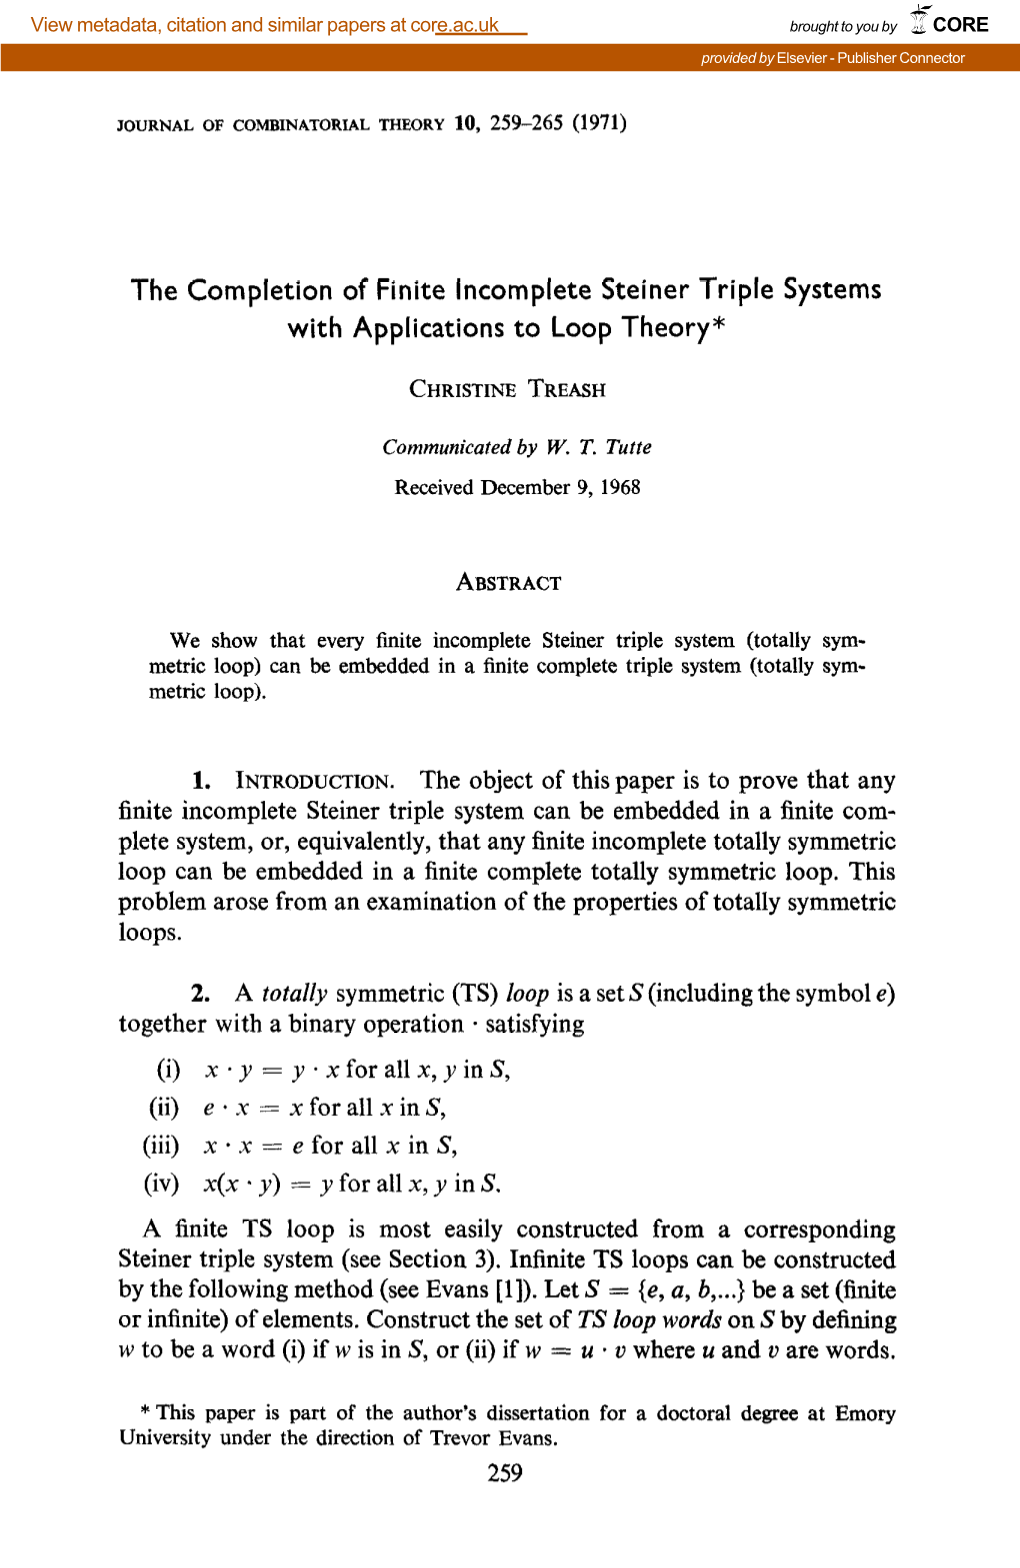 The Completion of Finite Incomplete Steiner Triple Systems with Applications to Loop Theory*